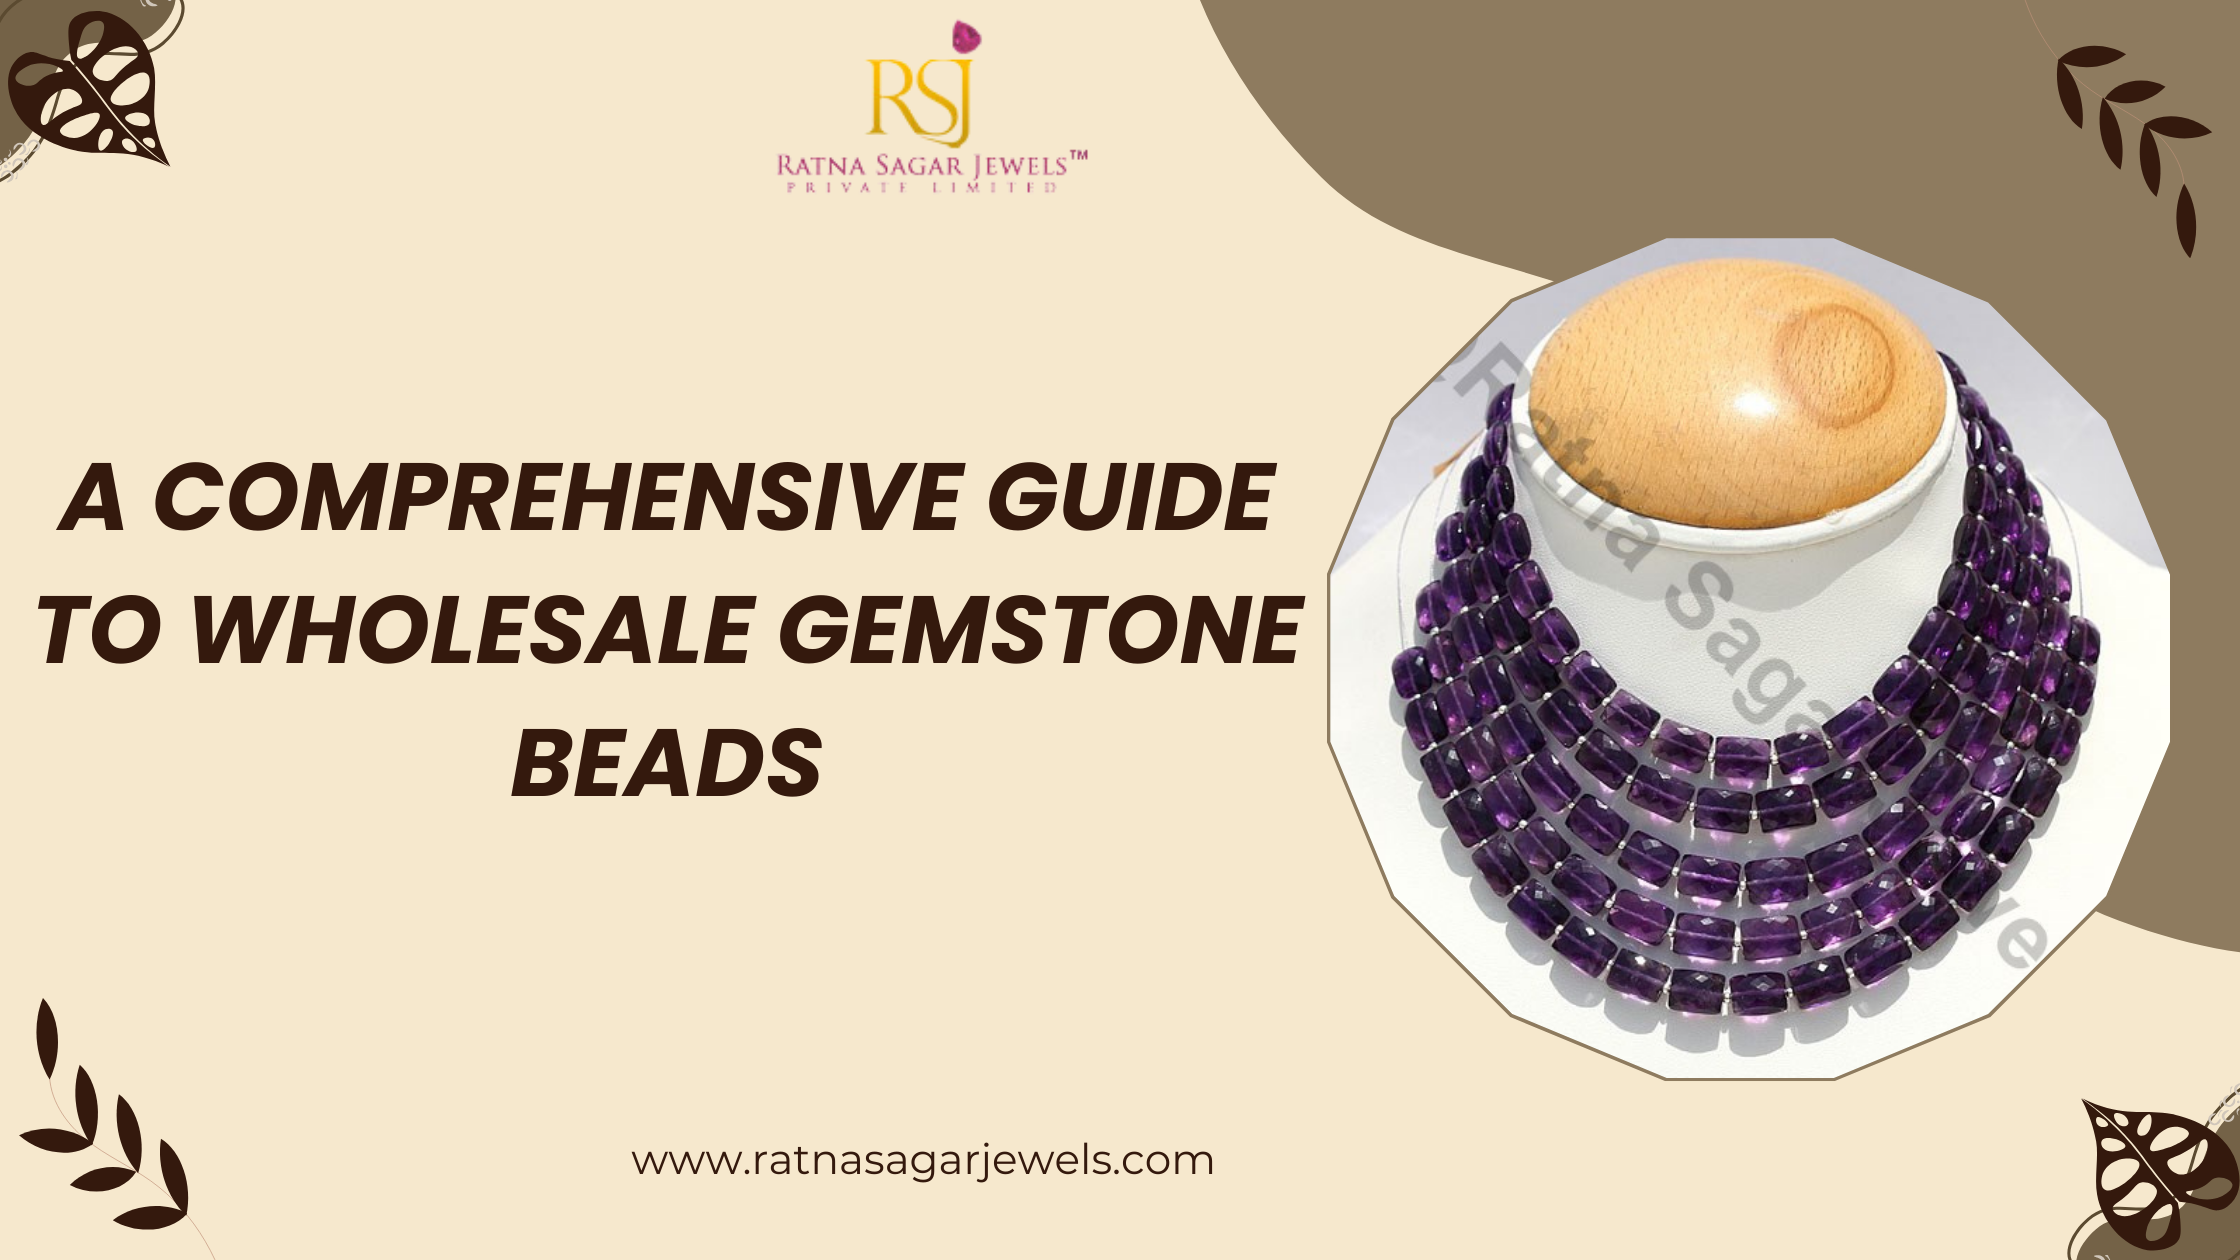 A Comprehensive Guide to Wholesale Gemstone Beads